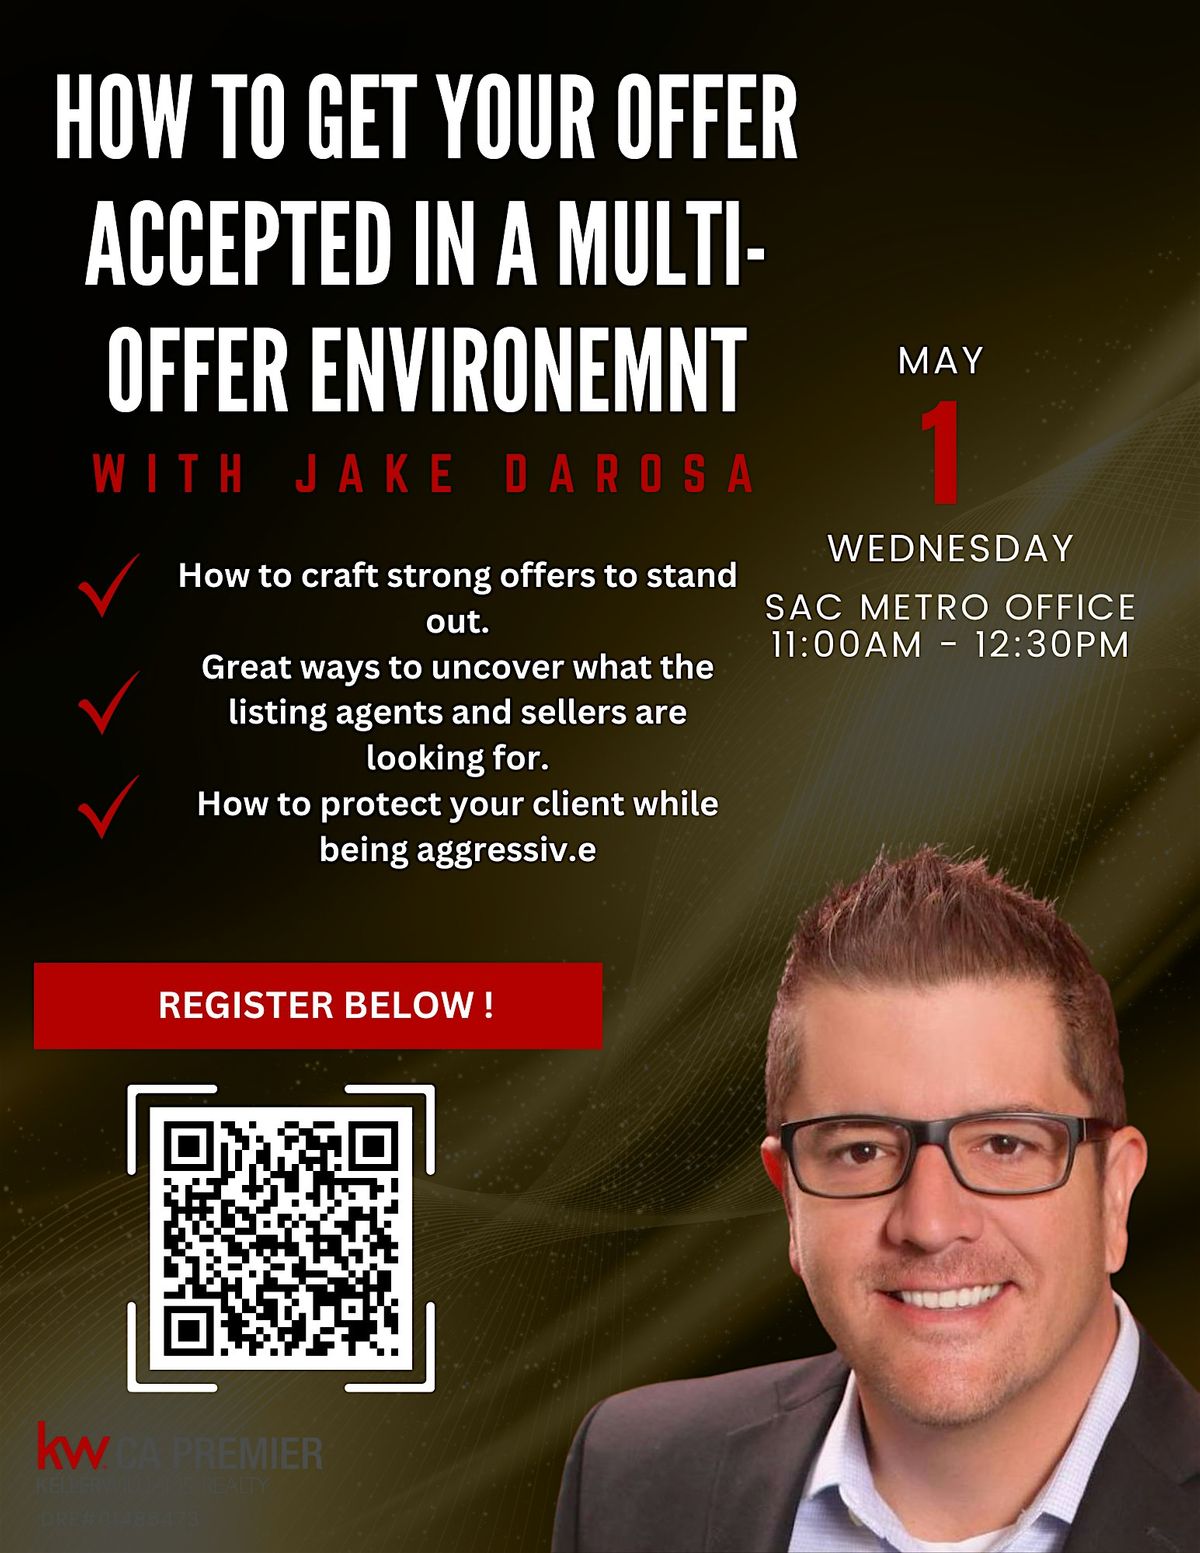 How to Get Your Offer Accepted in a Multi-Offer Environment